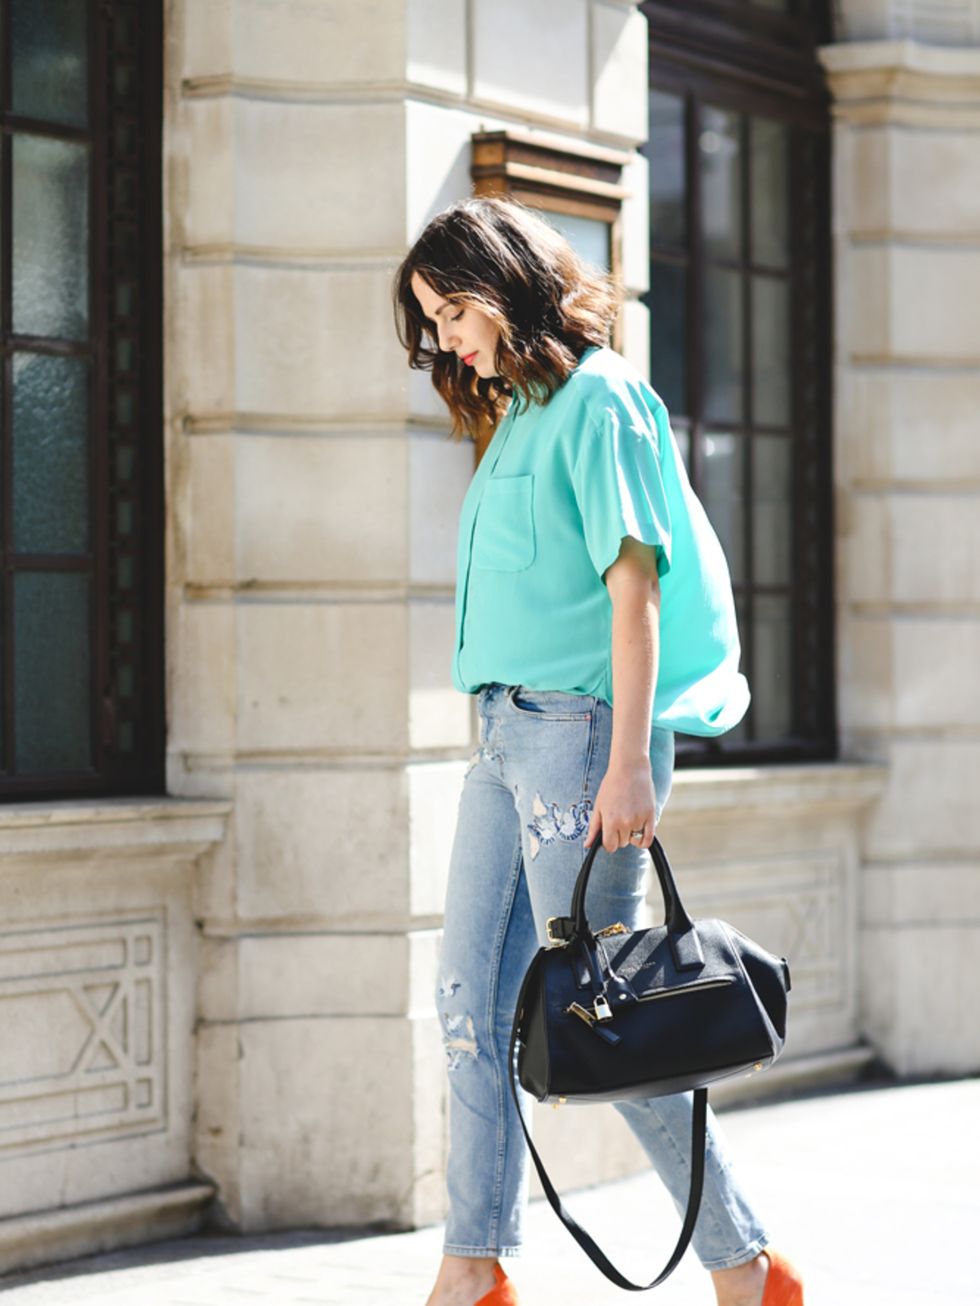 <p>Sophie Beresiner, Beauty Director</p>

<p>&amp; Other Stories shirt, Topshop jeans and shoes, Marc Jacobs bag</p>